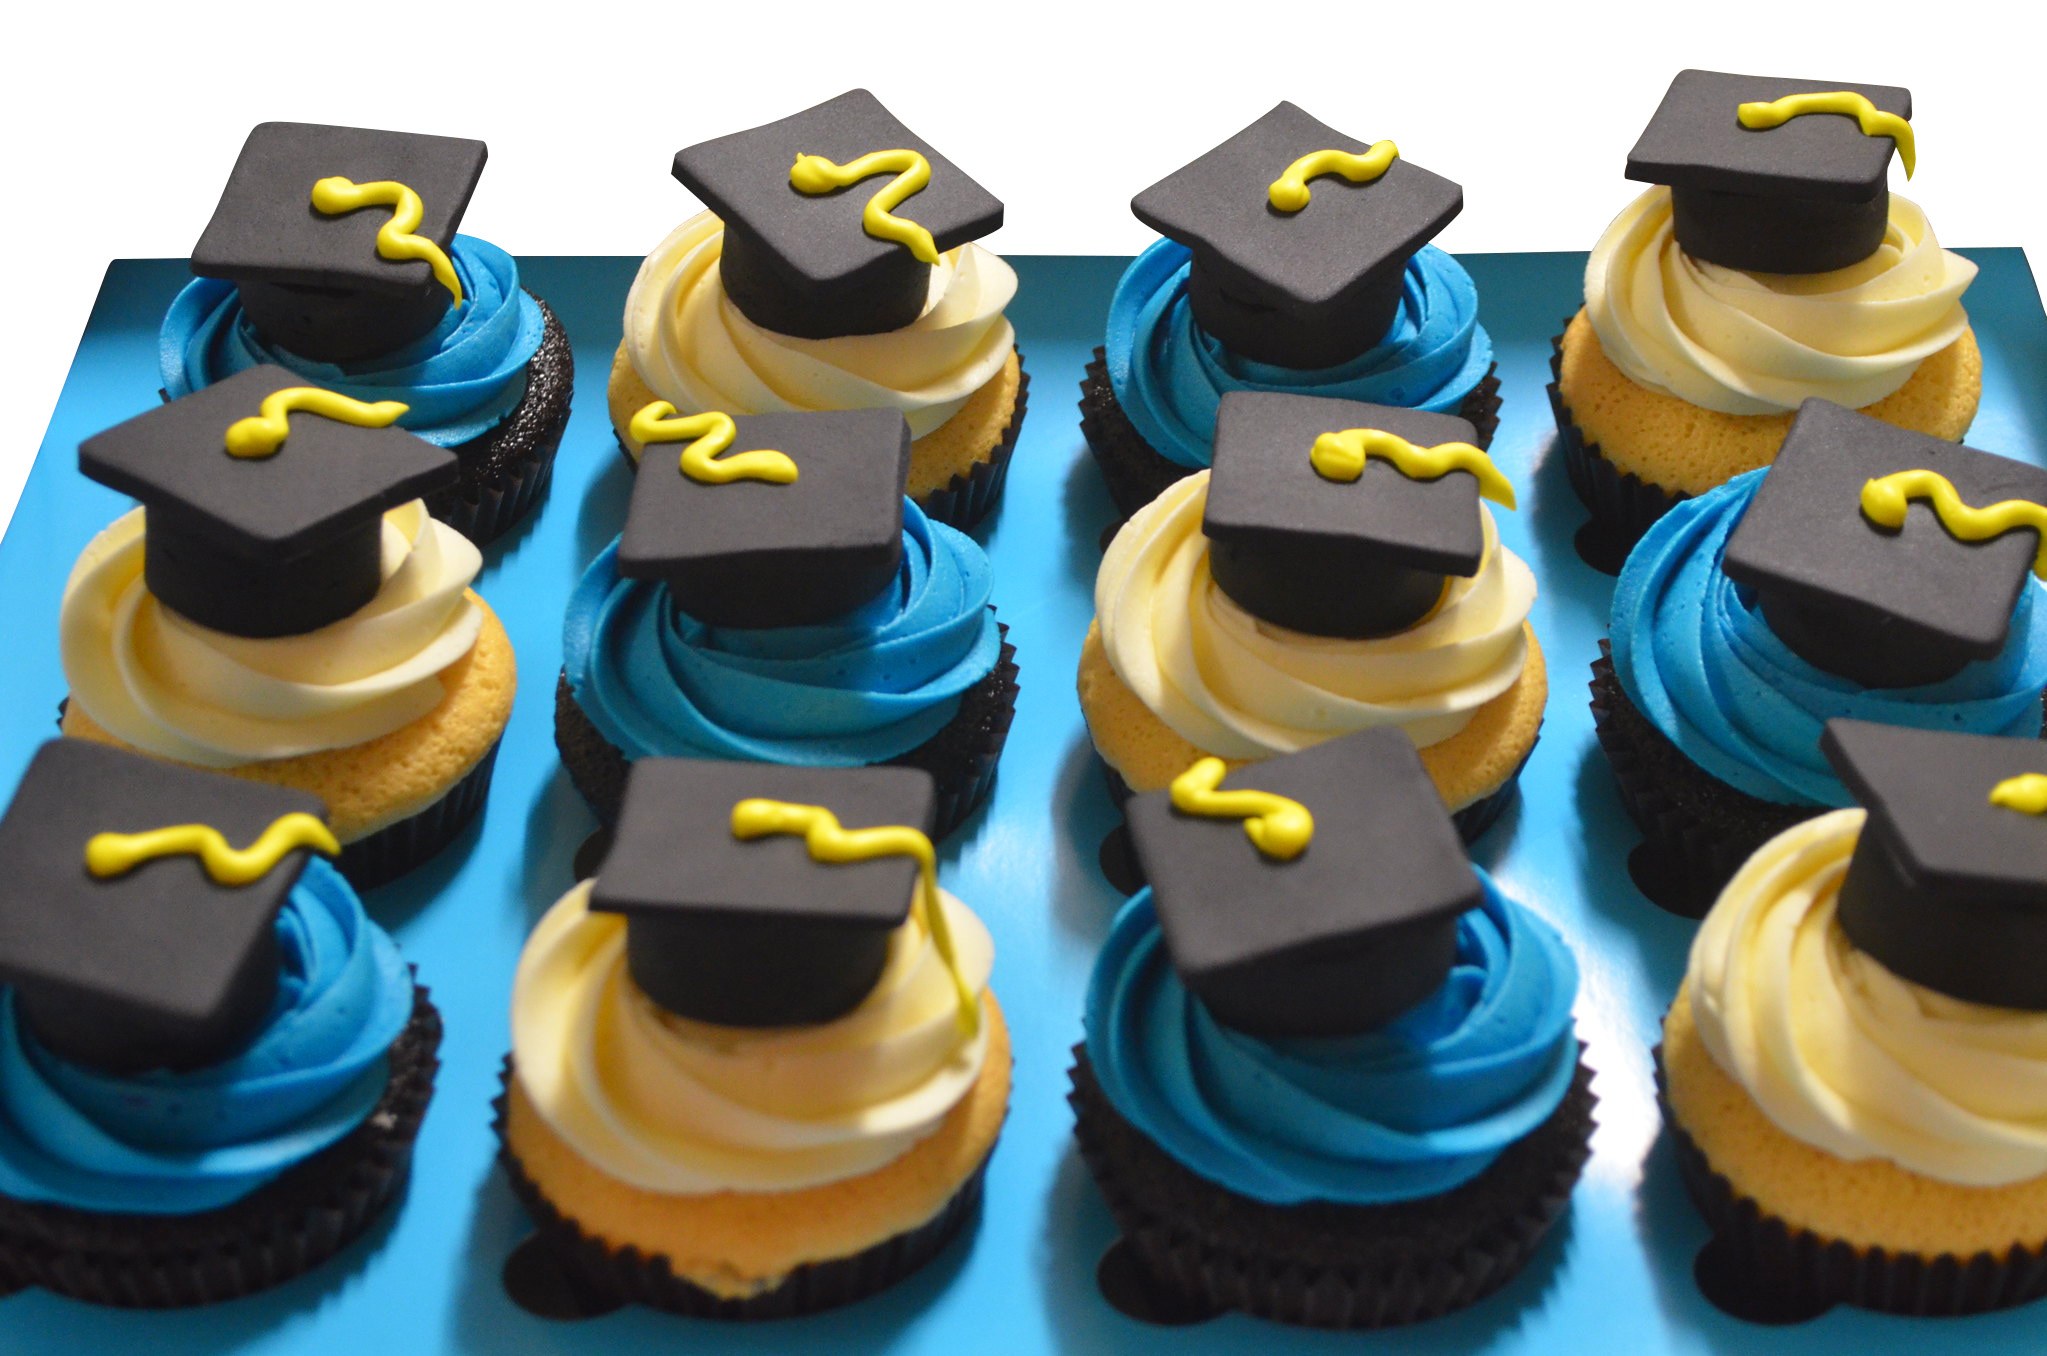 Yellow and Blue Frosting Graduation Theme Cupcakes - Pack of 6